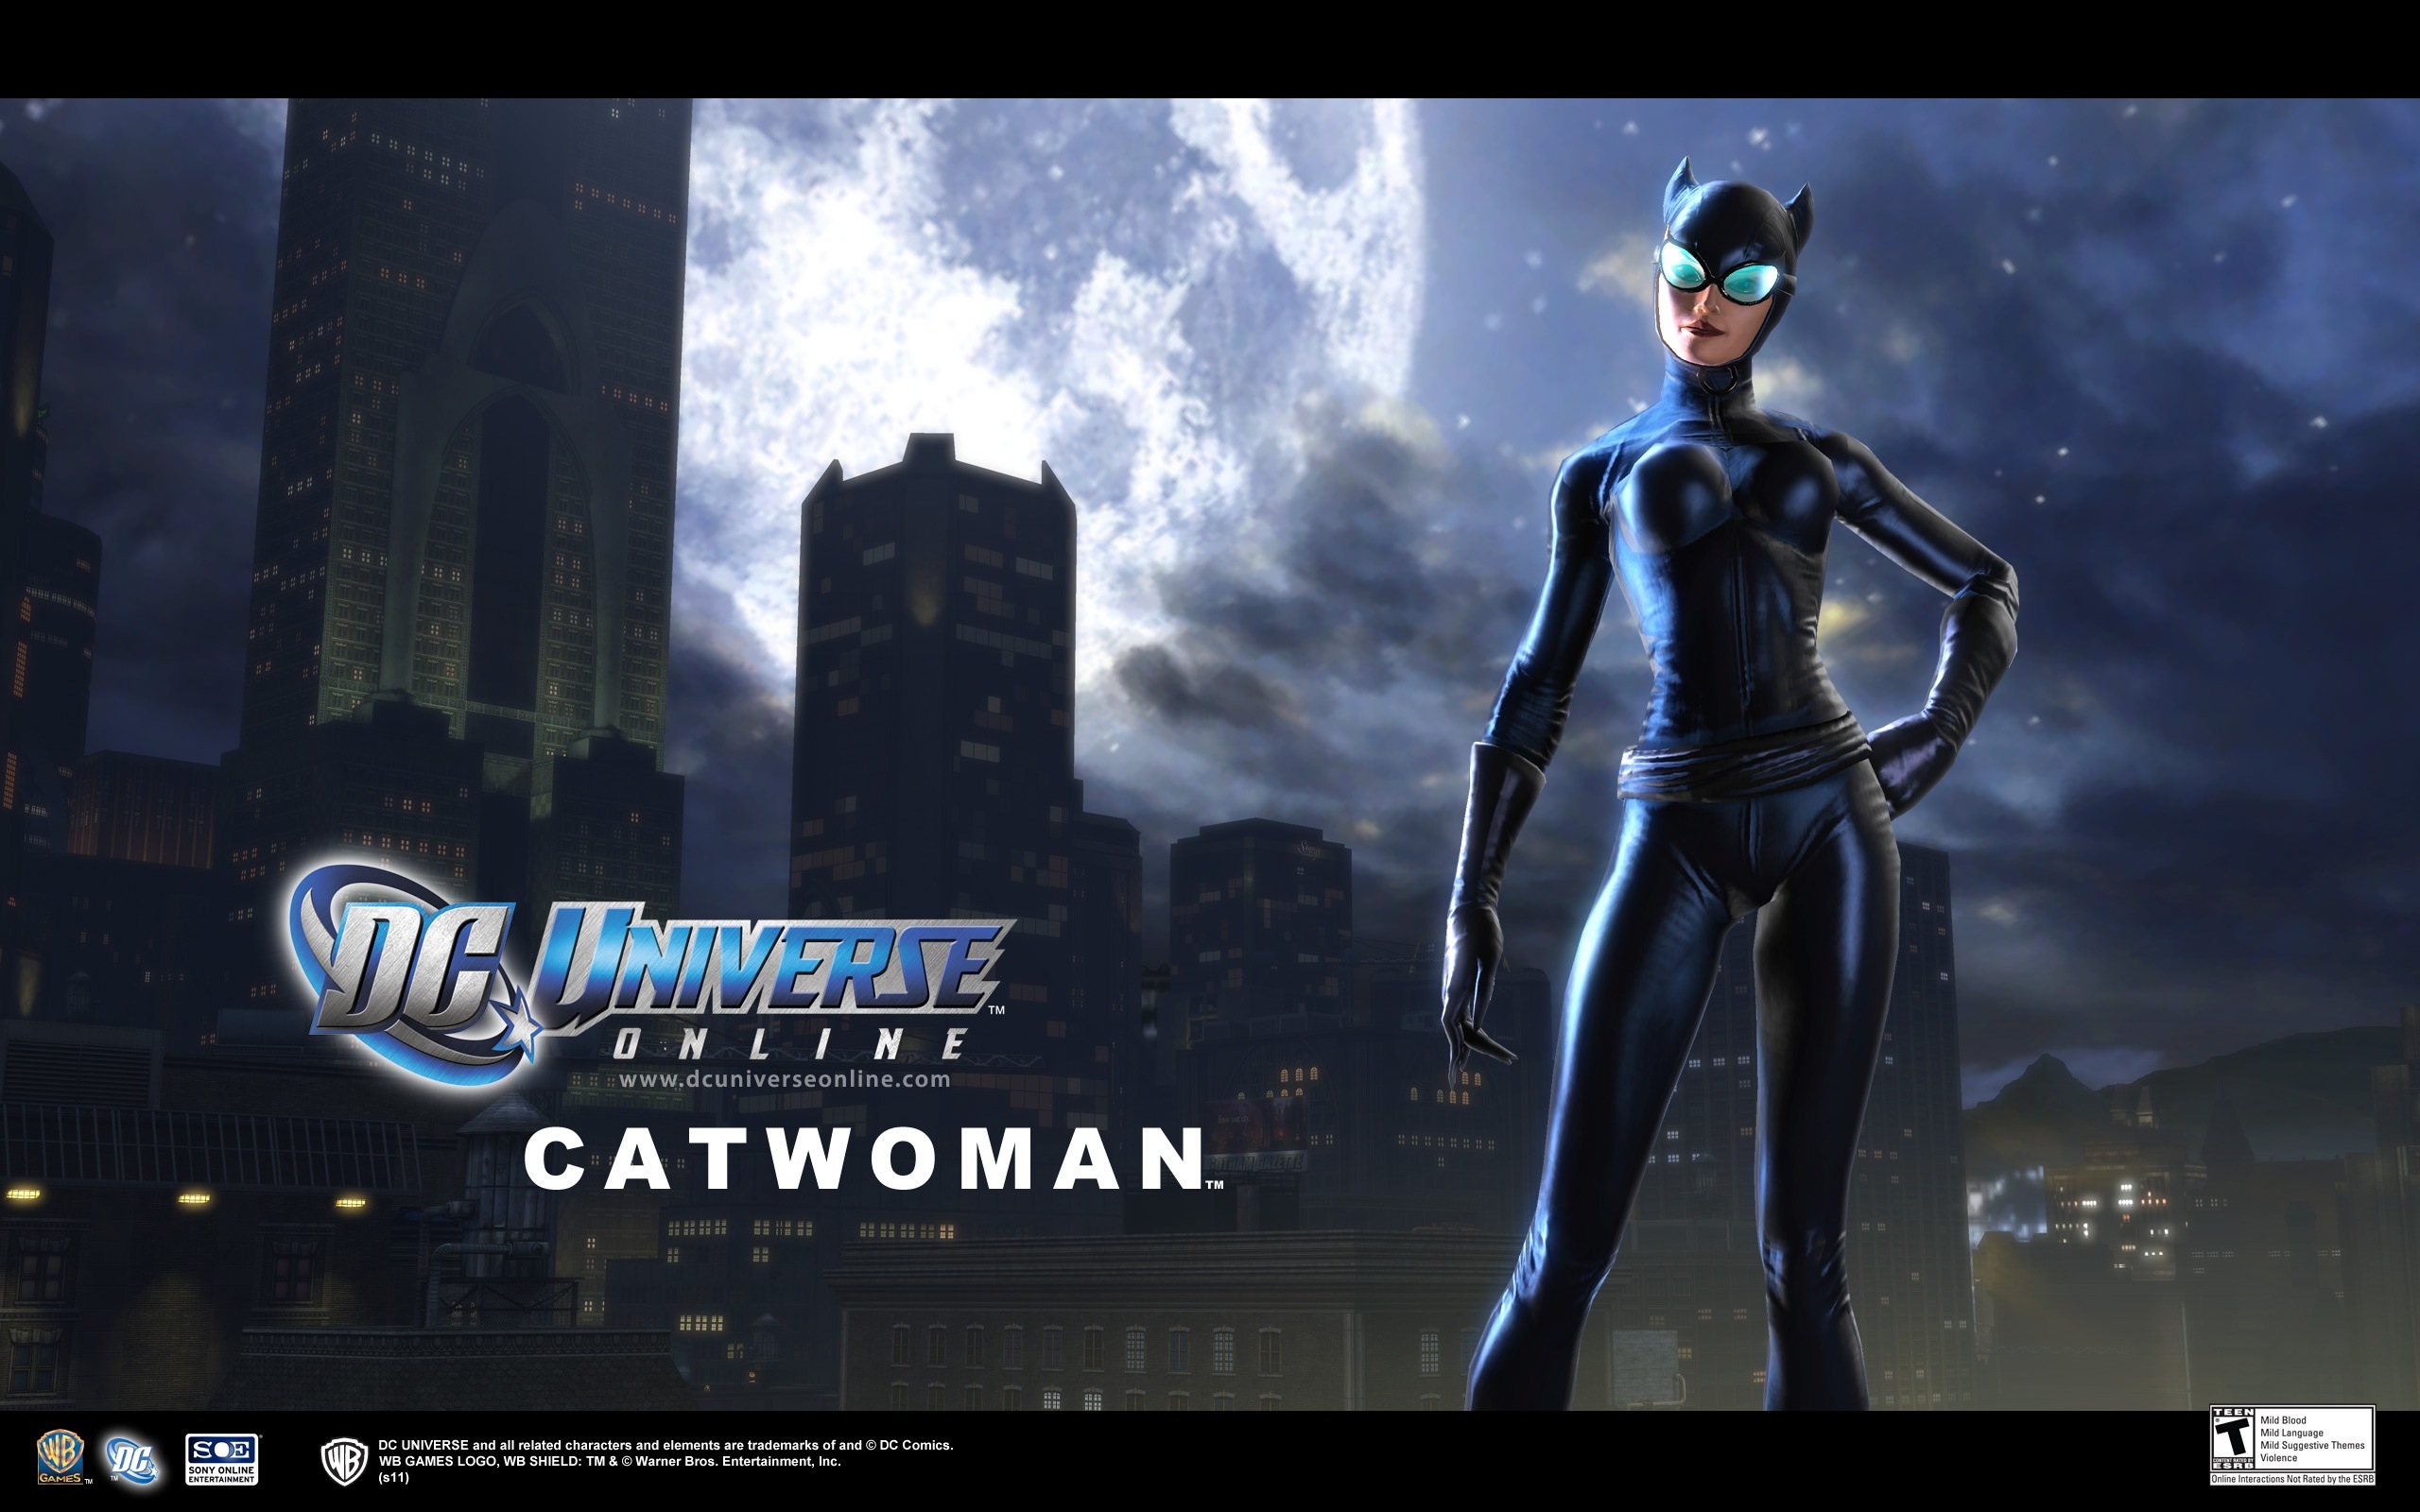 DC Universe Online HD game wallpapers #14 - 2560x1600